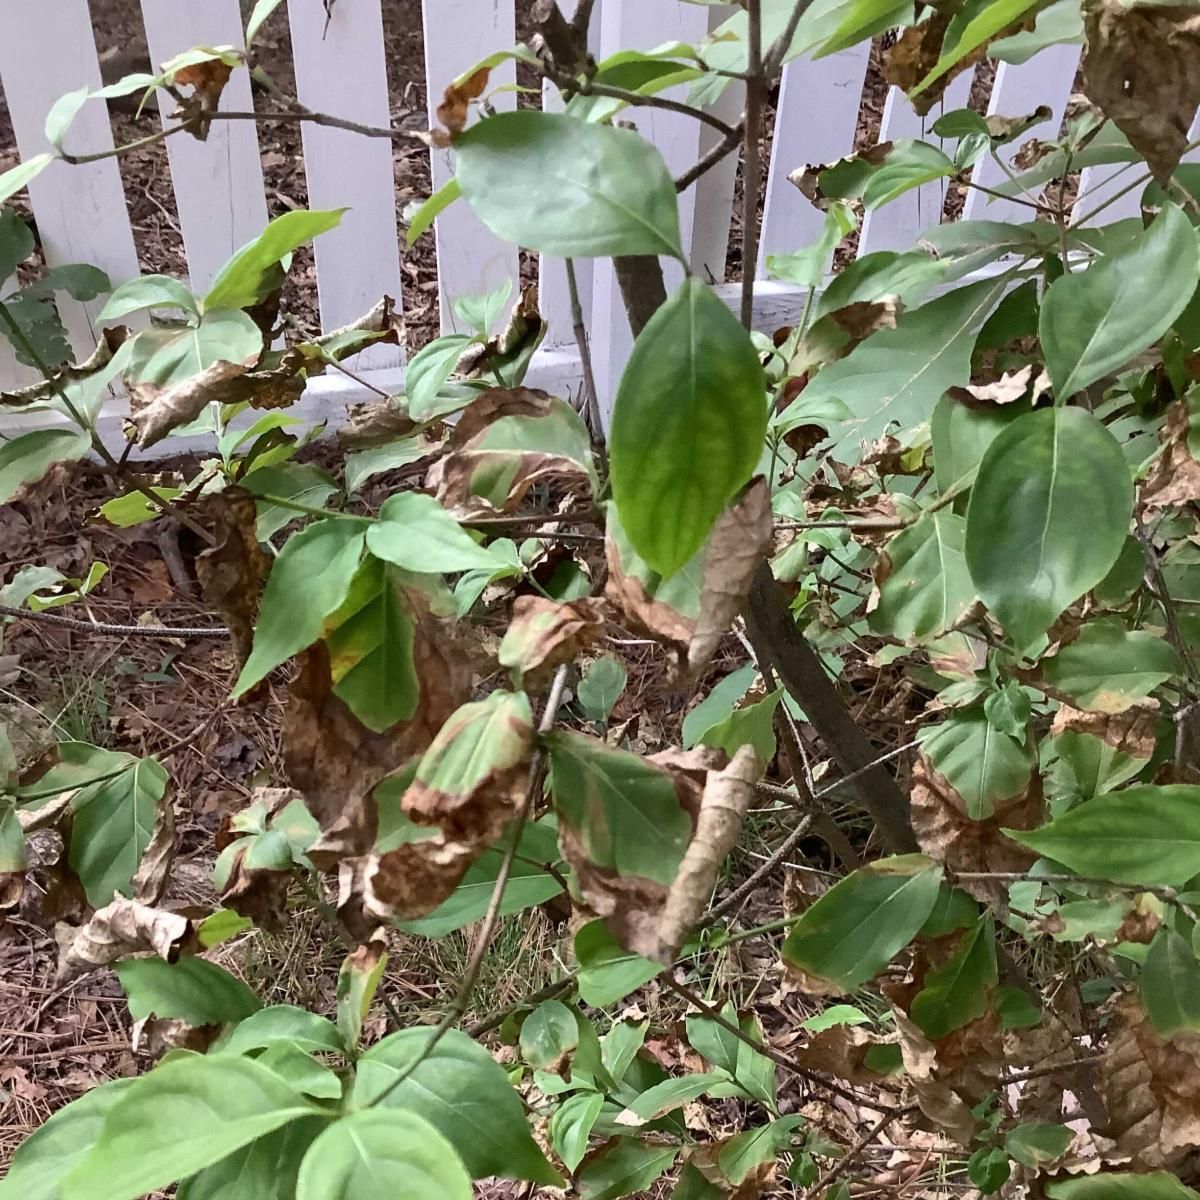 Leaves showing signs of heat stress